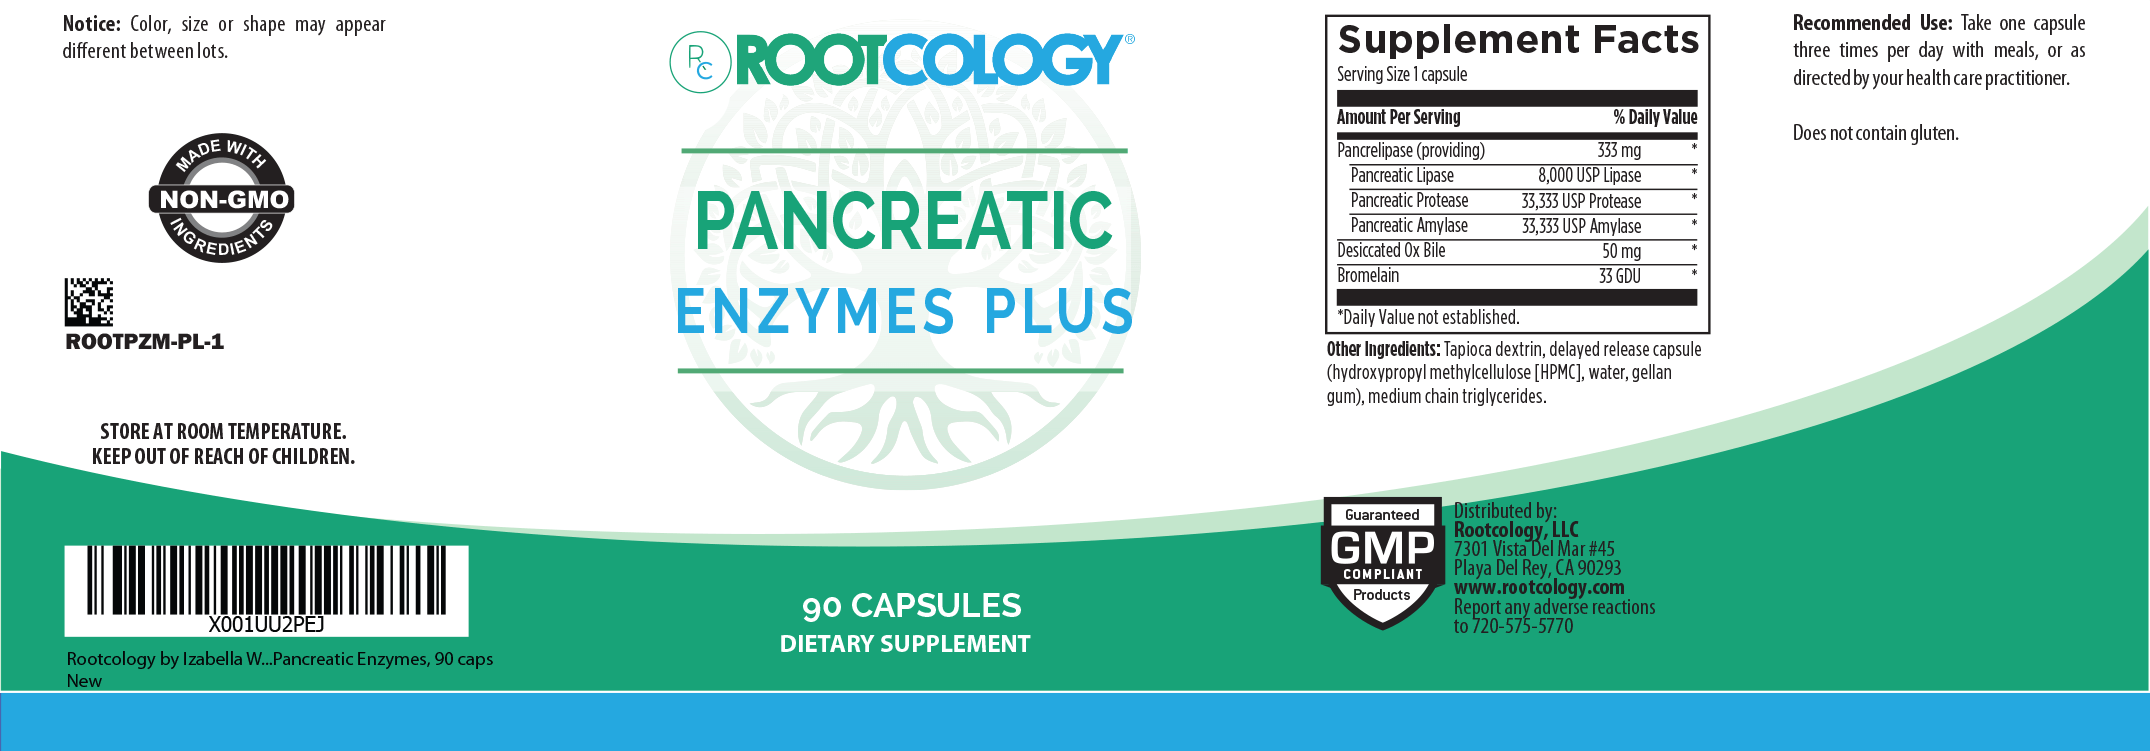 Rootcology Pancreatic Enzymes Plus Supplement Label